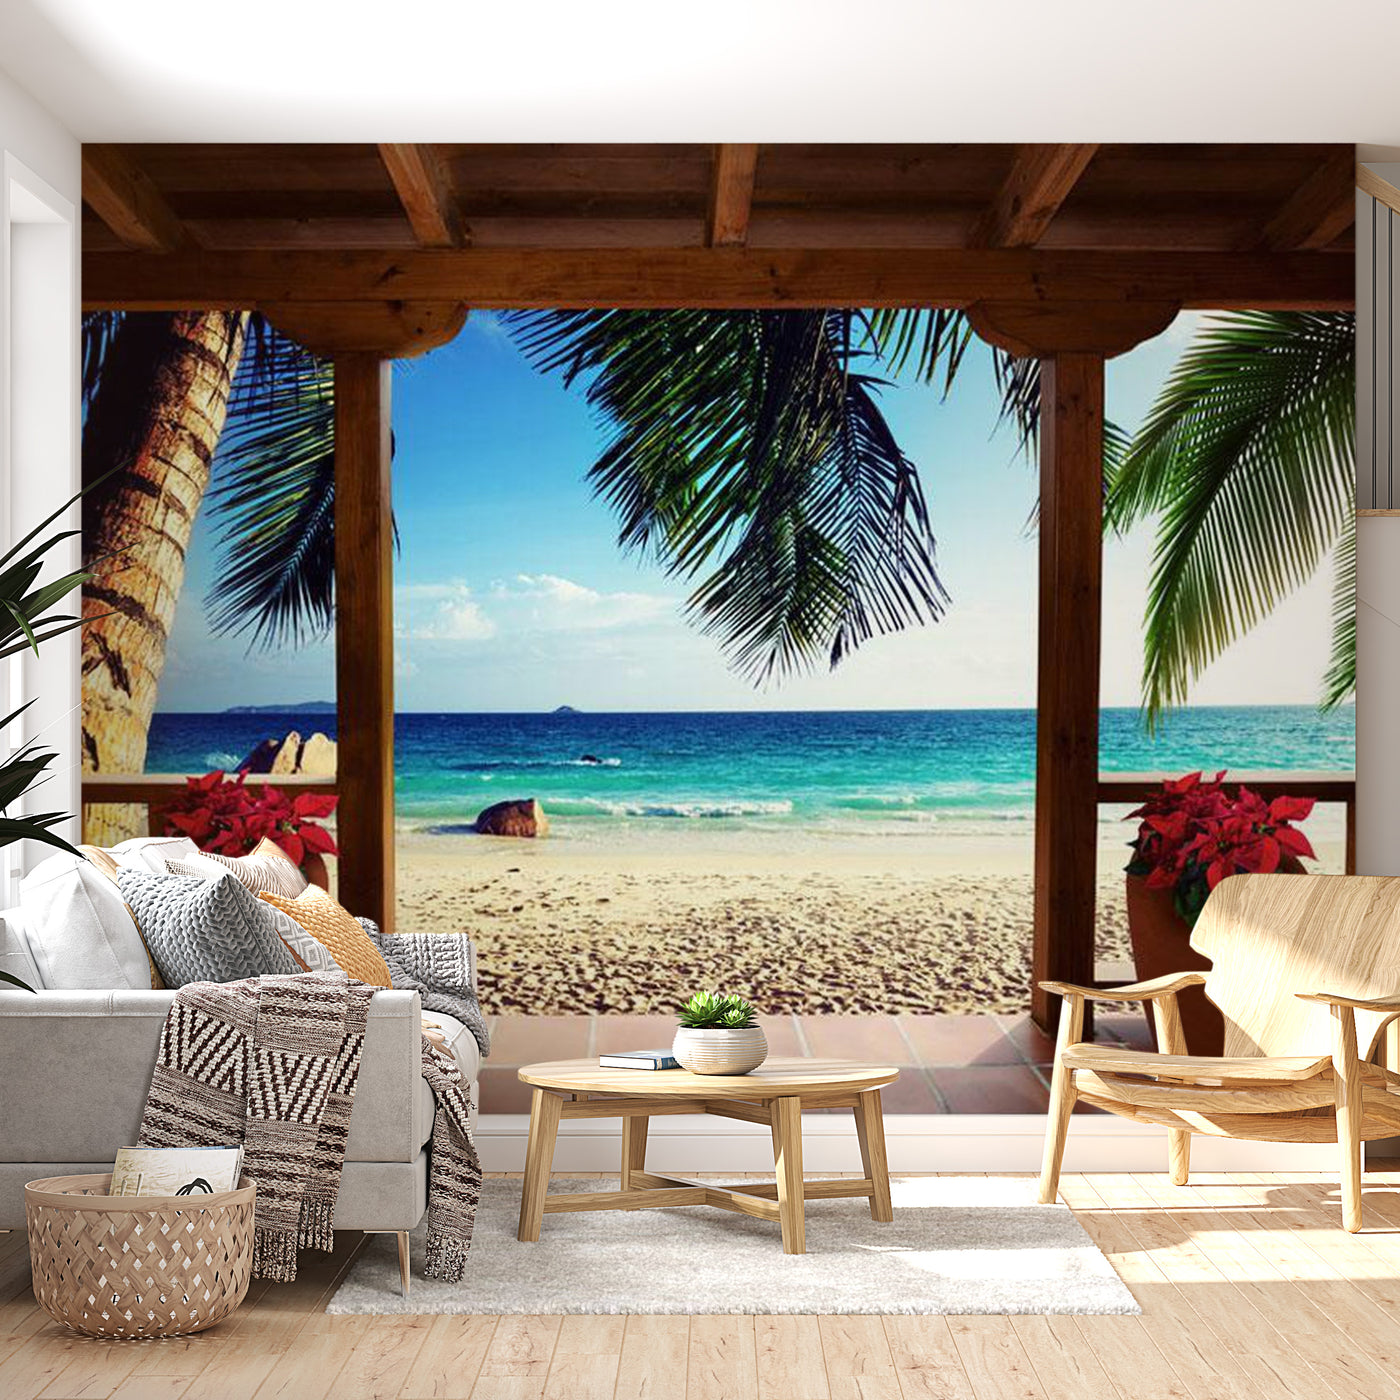 Peel & Stick Beach Wall Mural - Sunny Memories - Removable Wall Decals